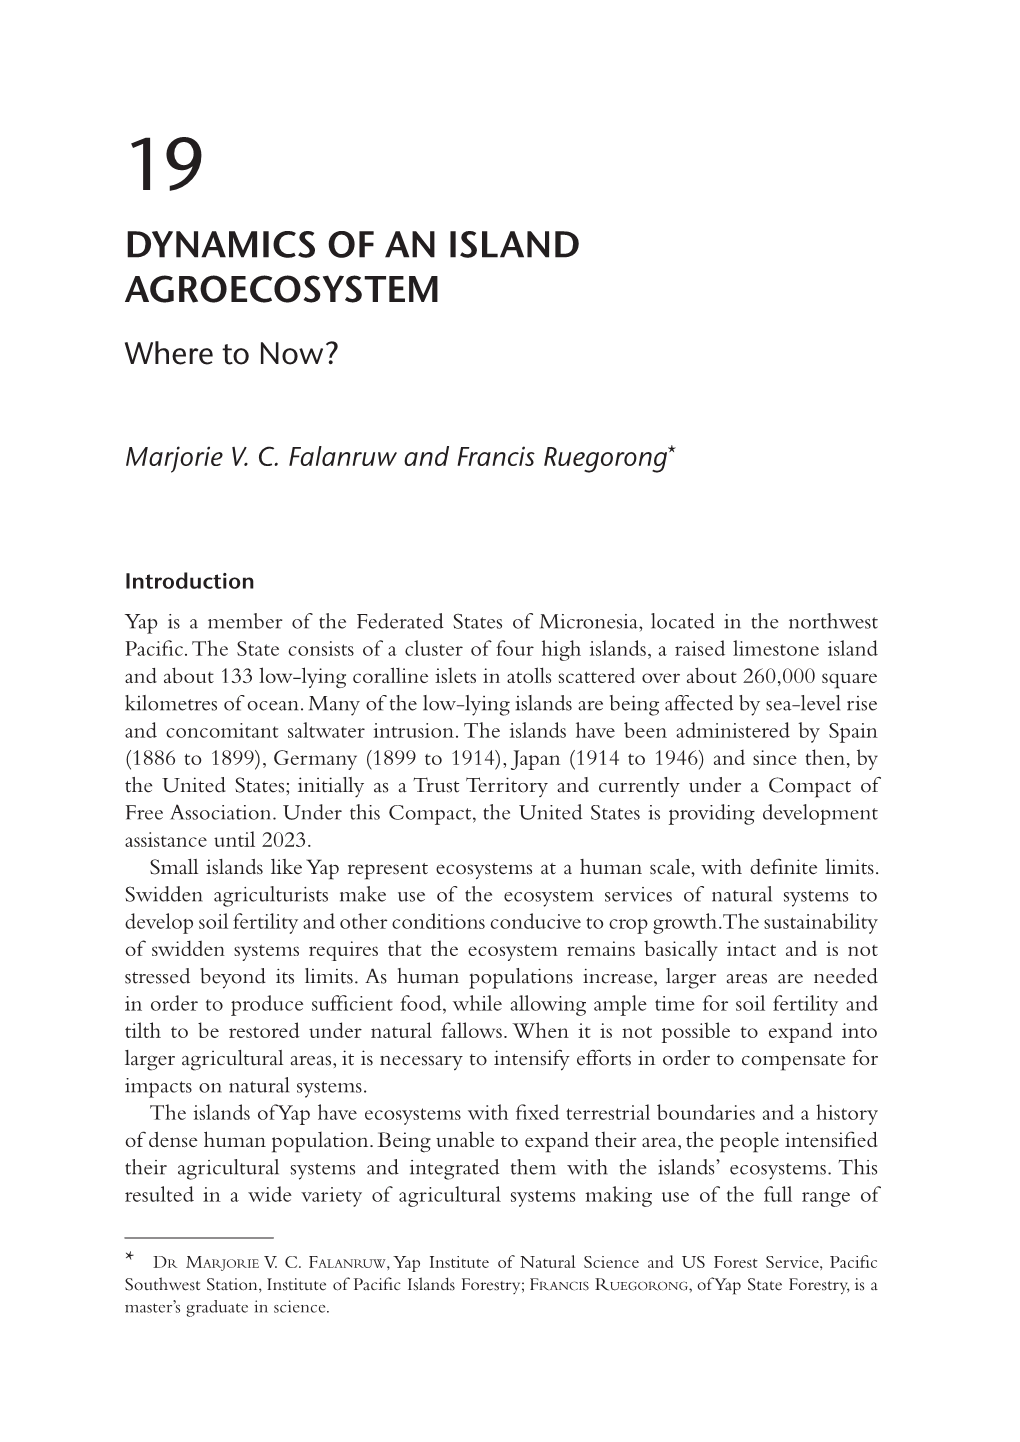 DYNAMICS of an ISLAND AGROECOSYSTEM Where to Now?